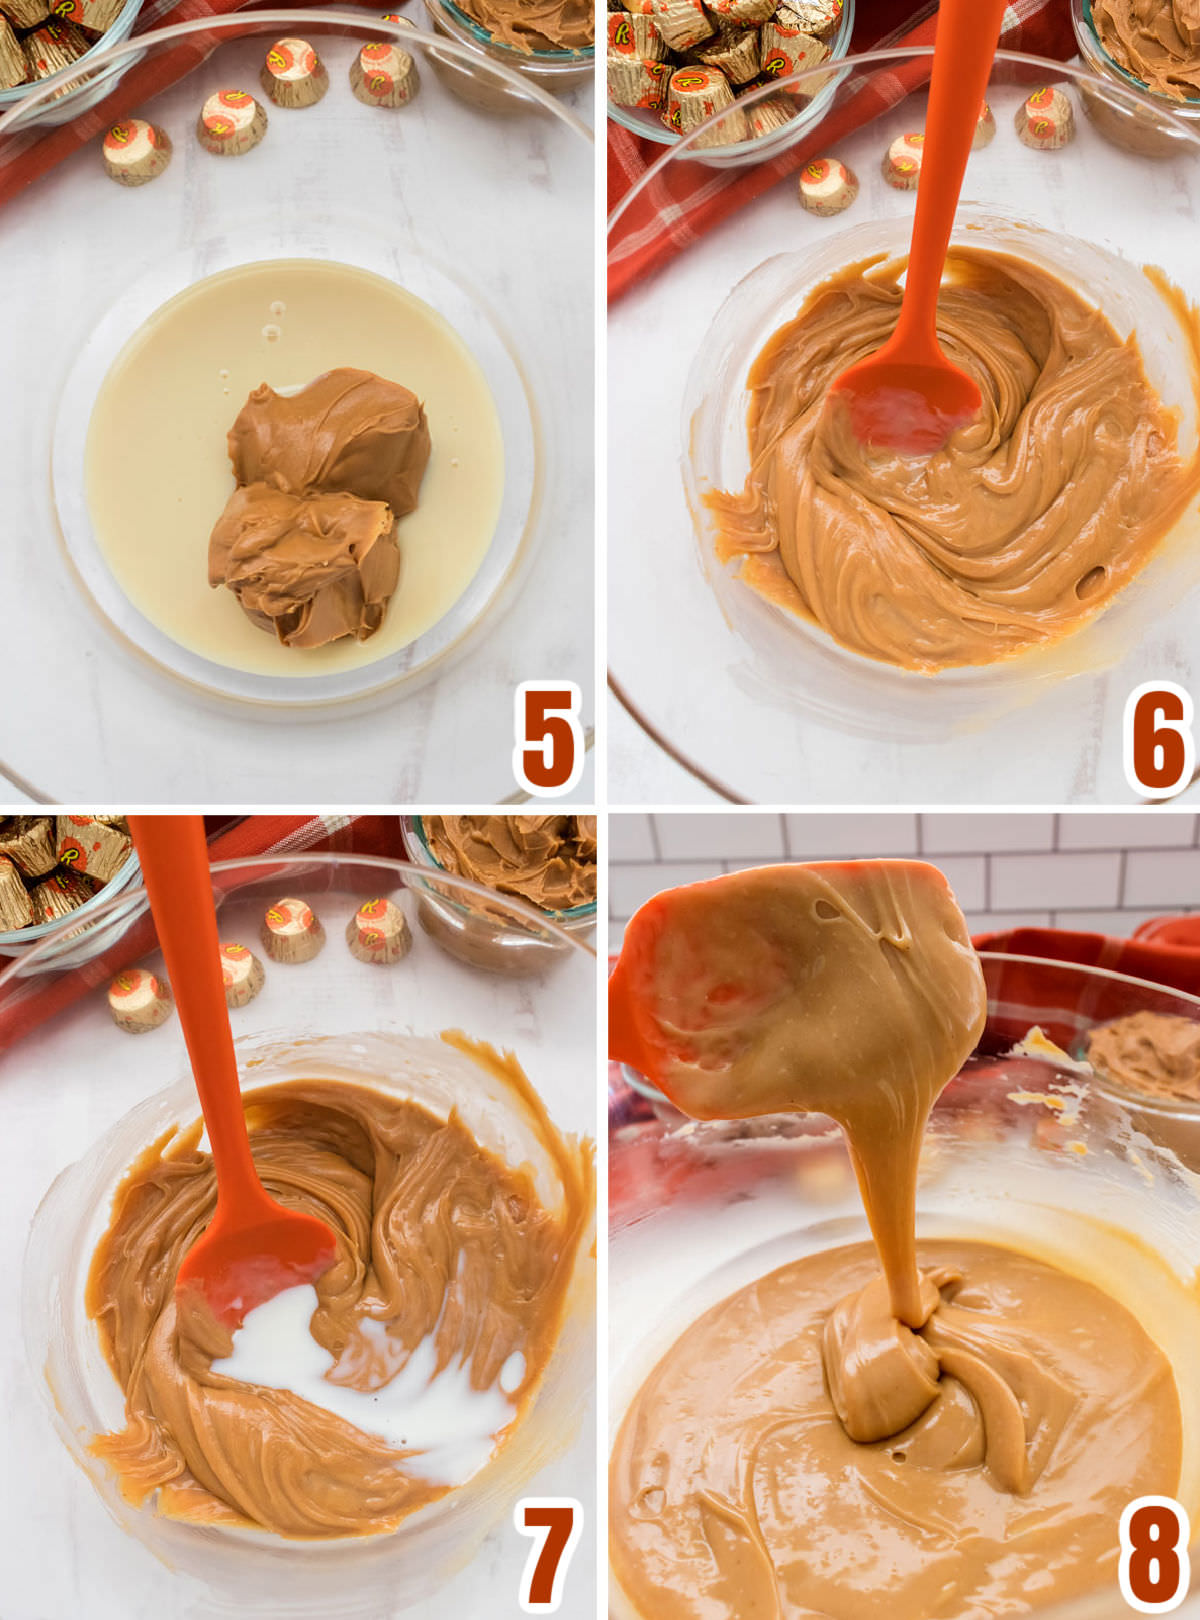 Collage image showing the steps to make the Peanut Butter filling for the Chocolate Poke Cake.